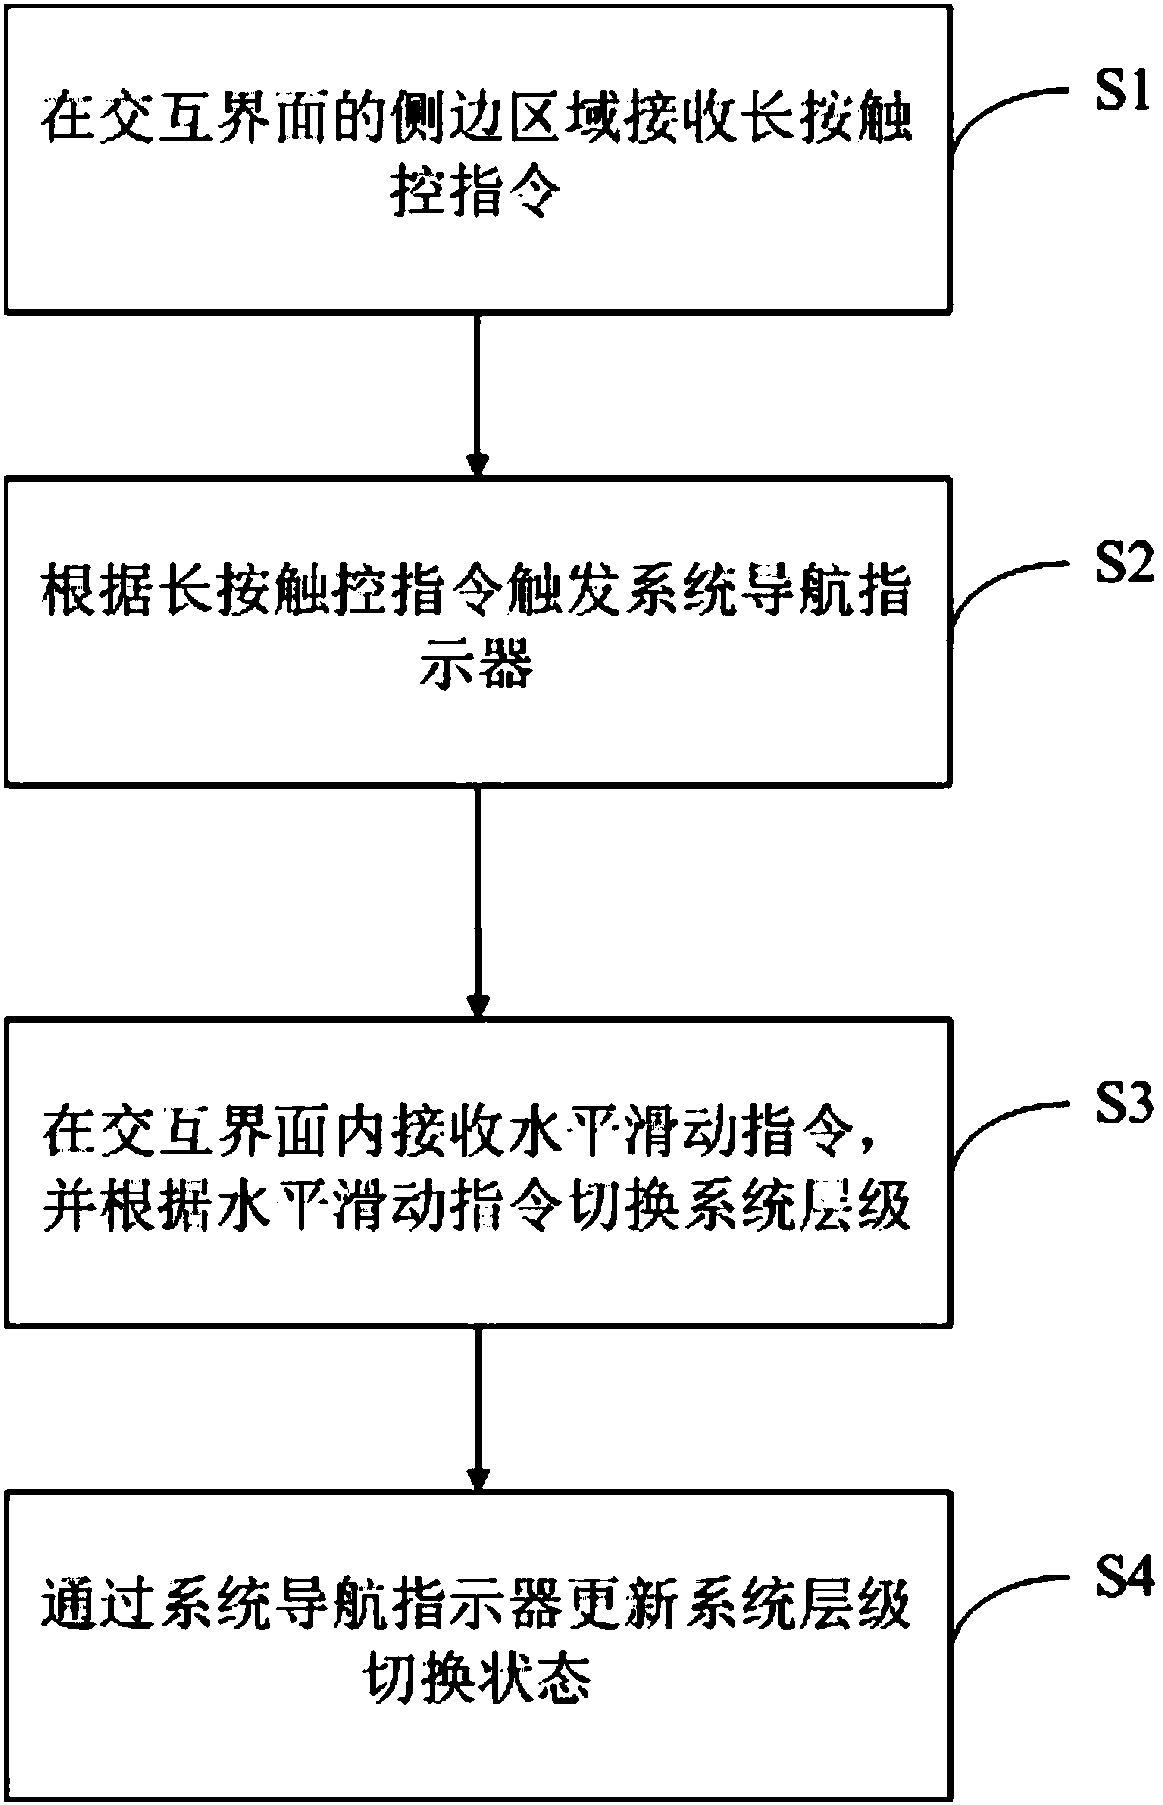 System navigation method and device, and computer readable storage medium